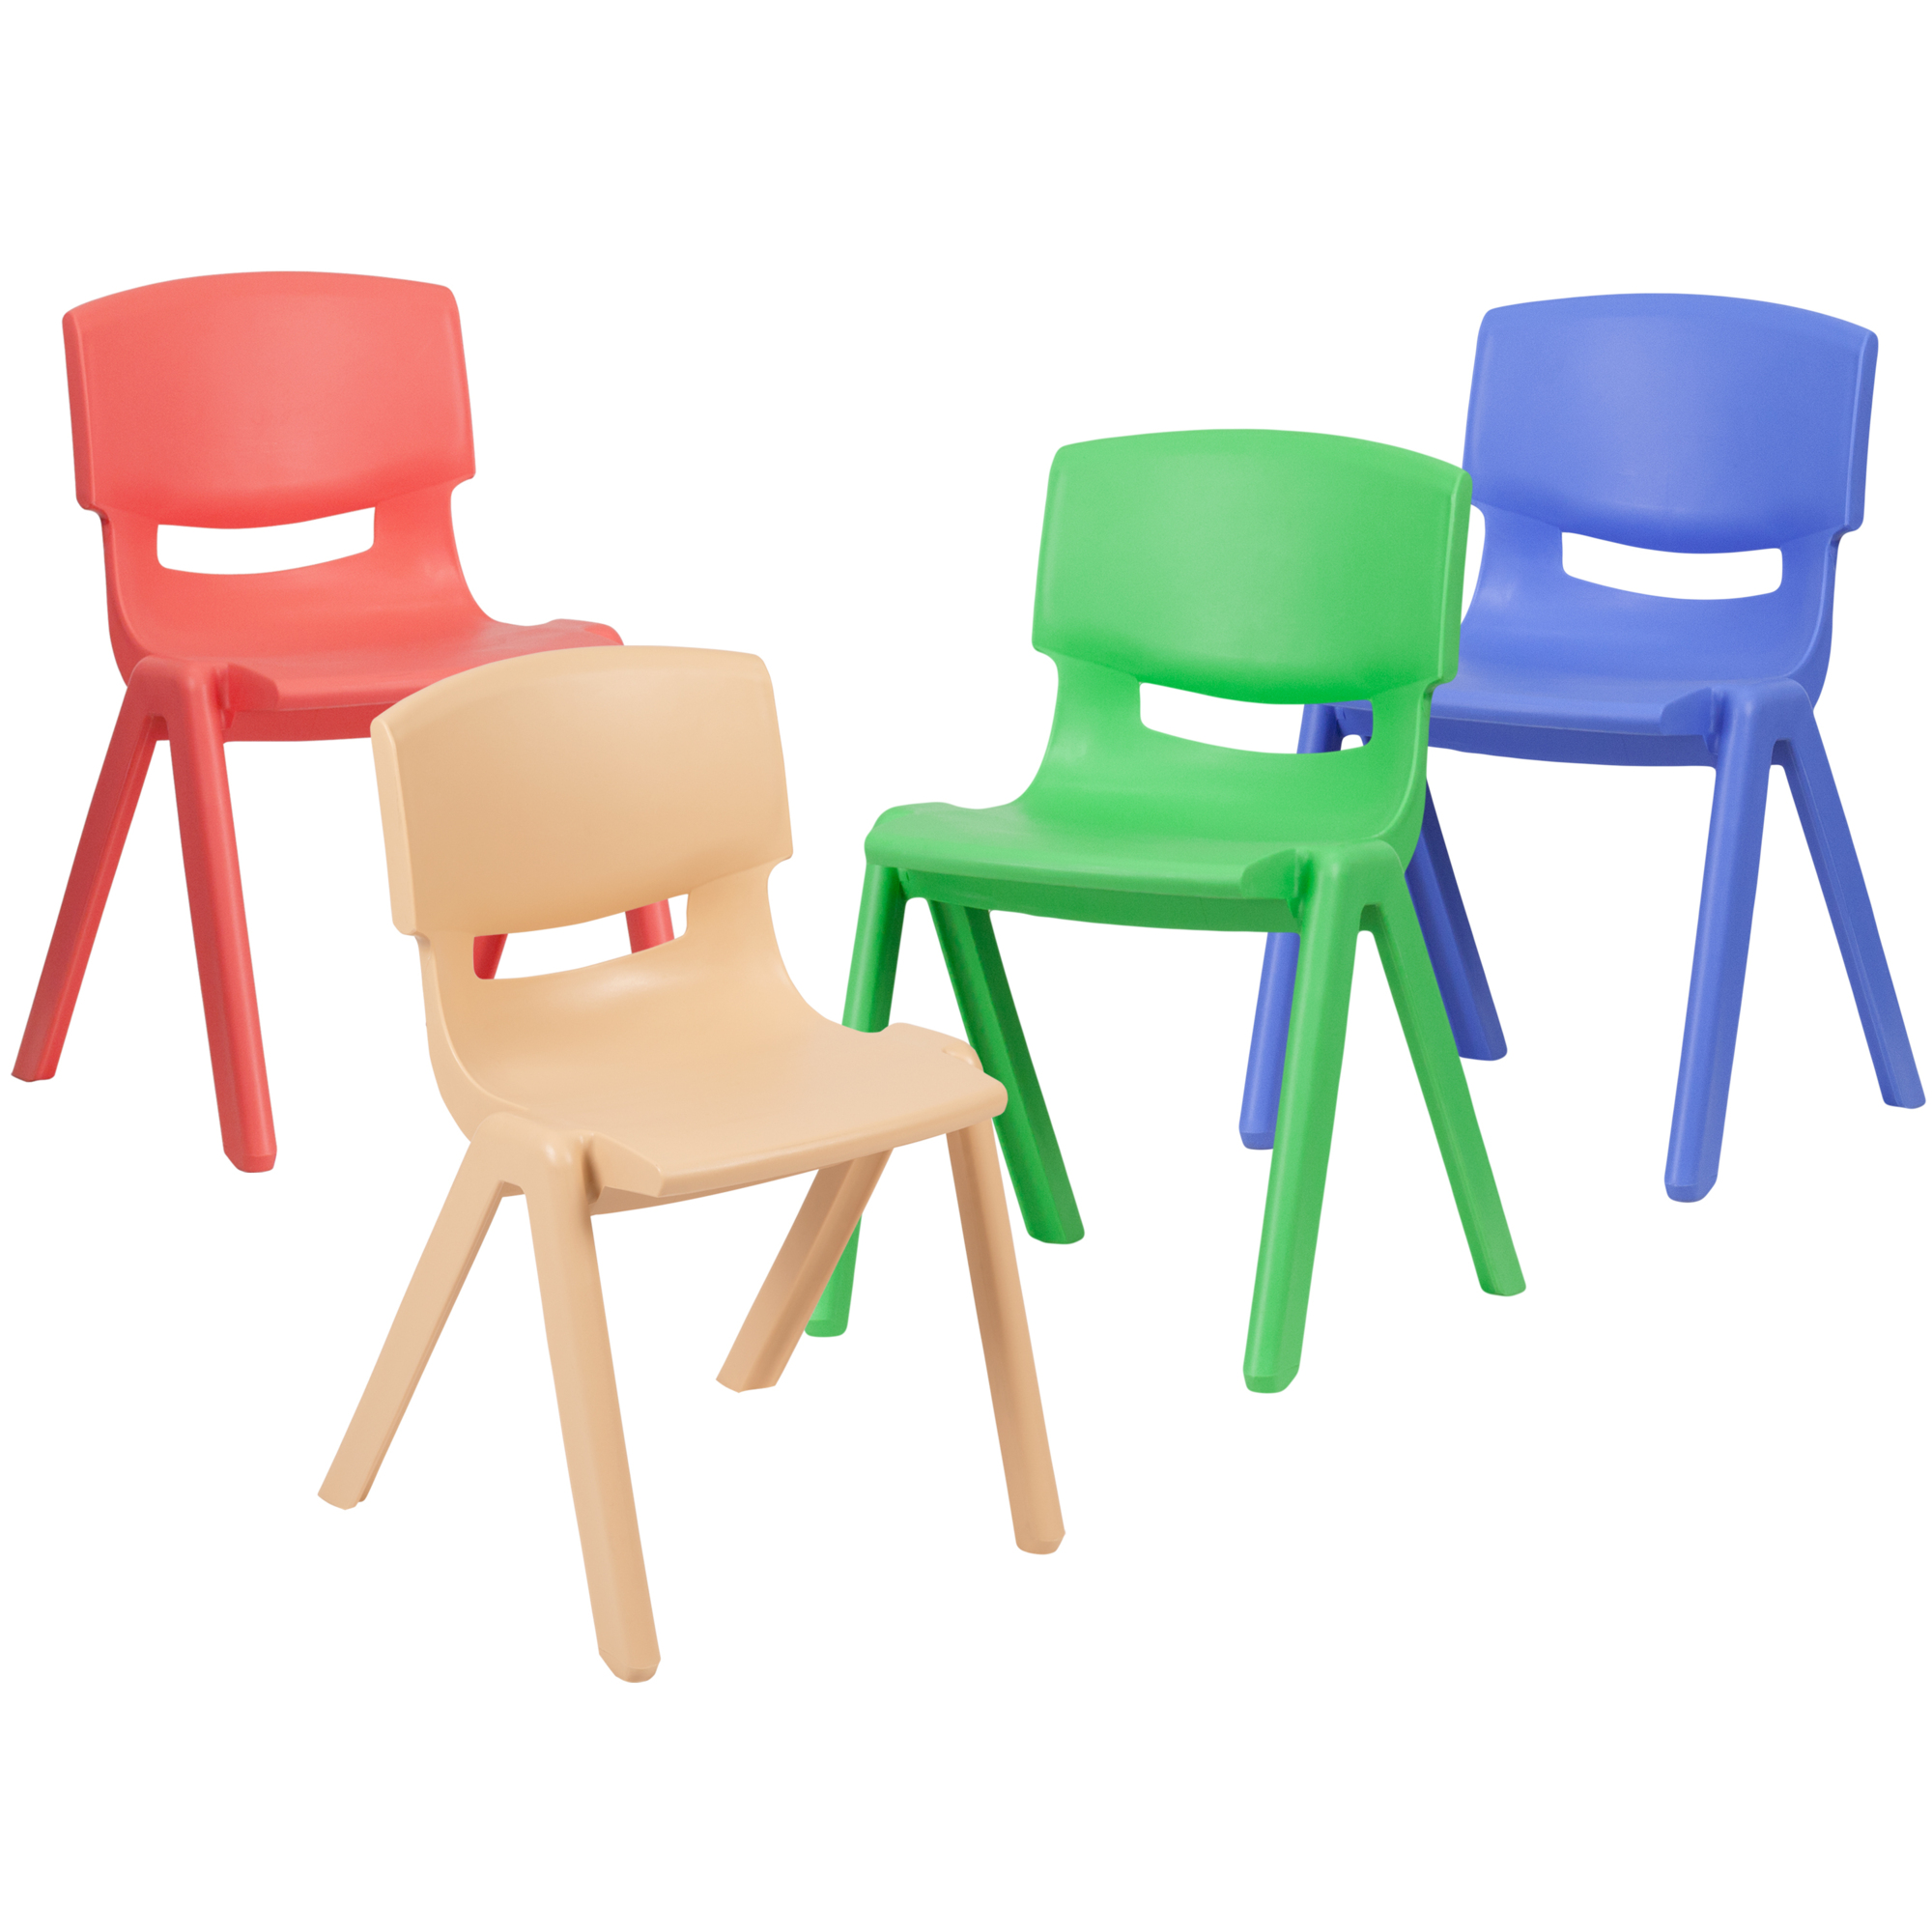 Flash Furniture, 4 Pack Plastic School Chair-13.25Inch H Seat, Assorted, Primary Color Other, Included (qty.) 4, Model 4YUYCX4004MULTI